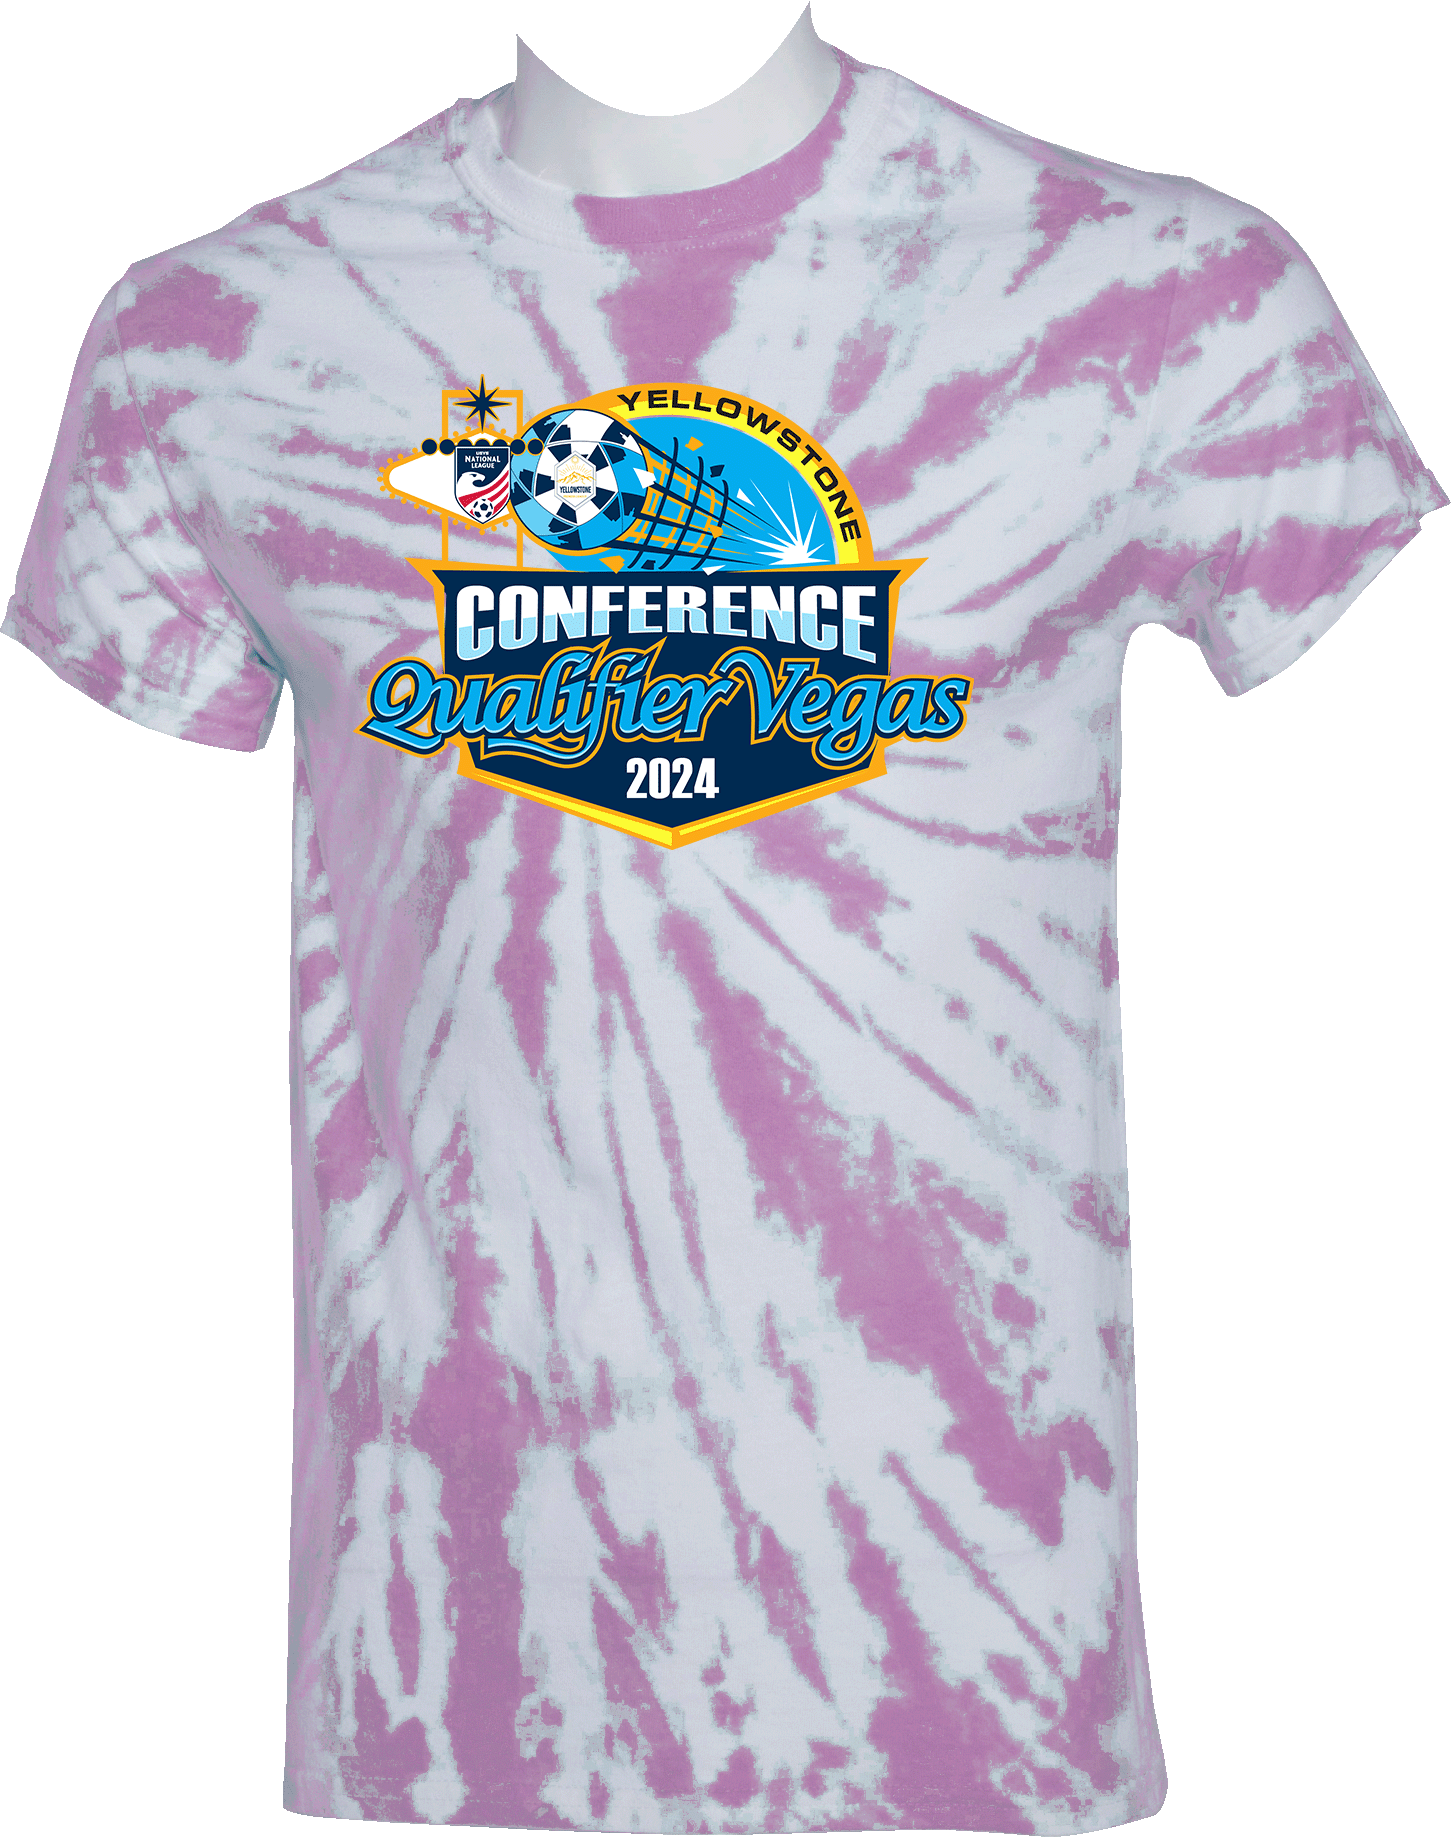 Tie-Dye Short Sleeves - 2024 Yellowstone Conference Qualifier Vegas